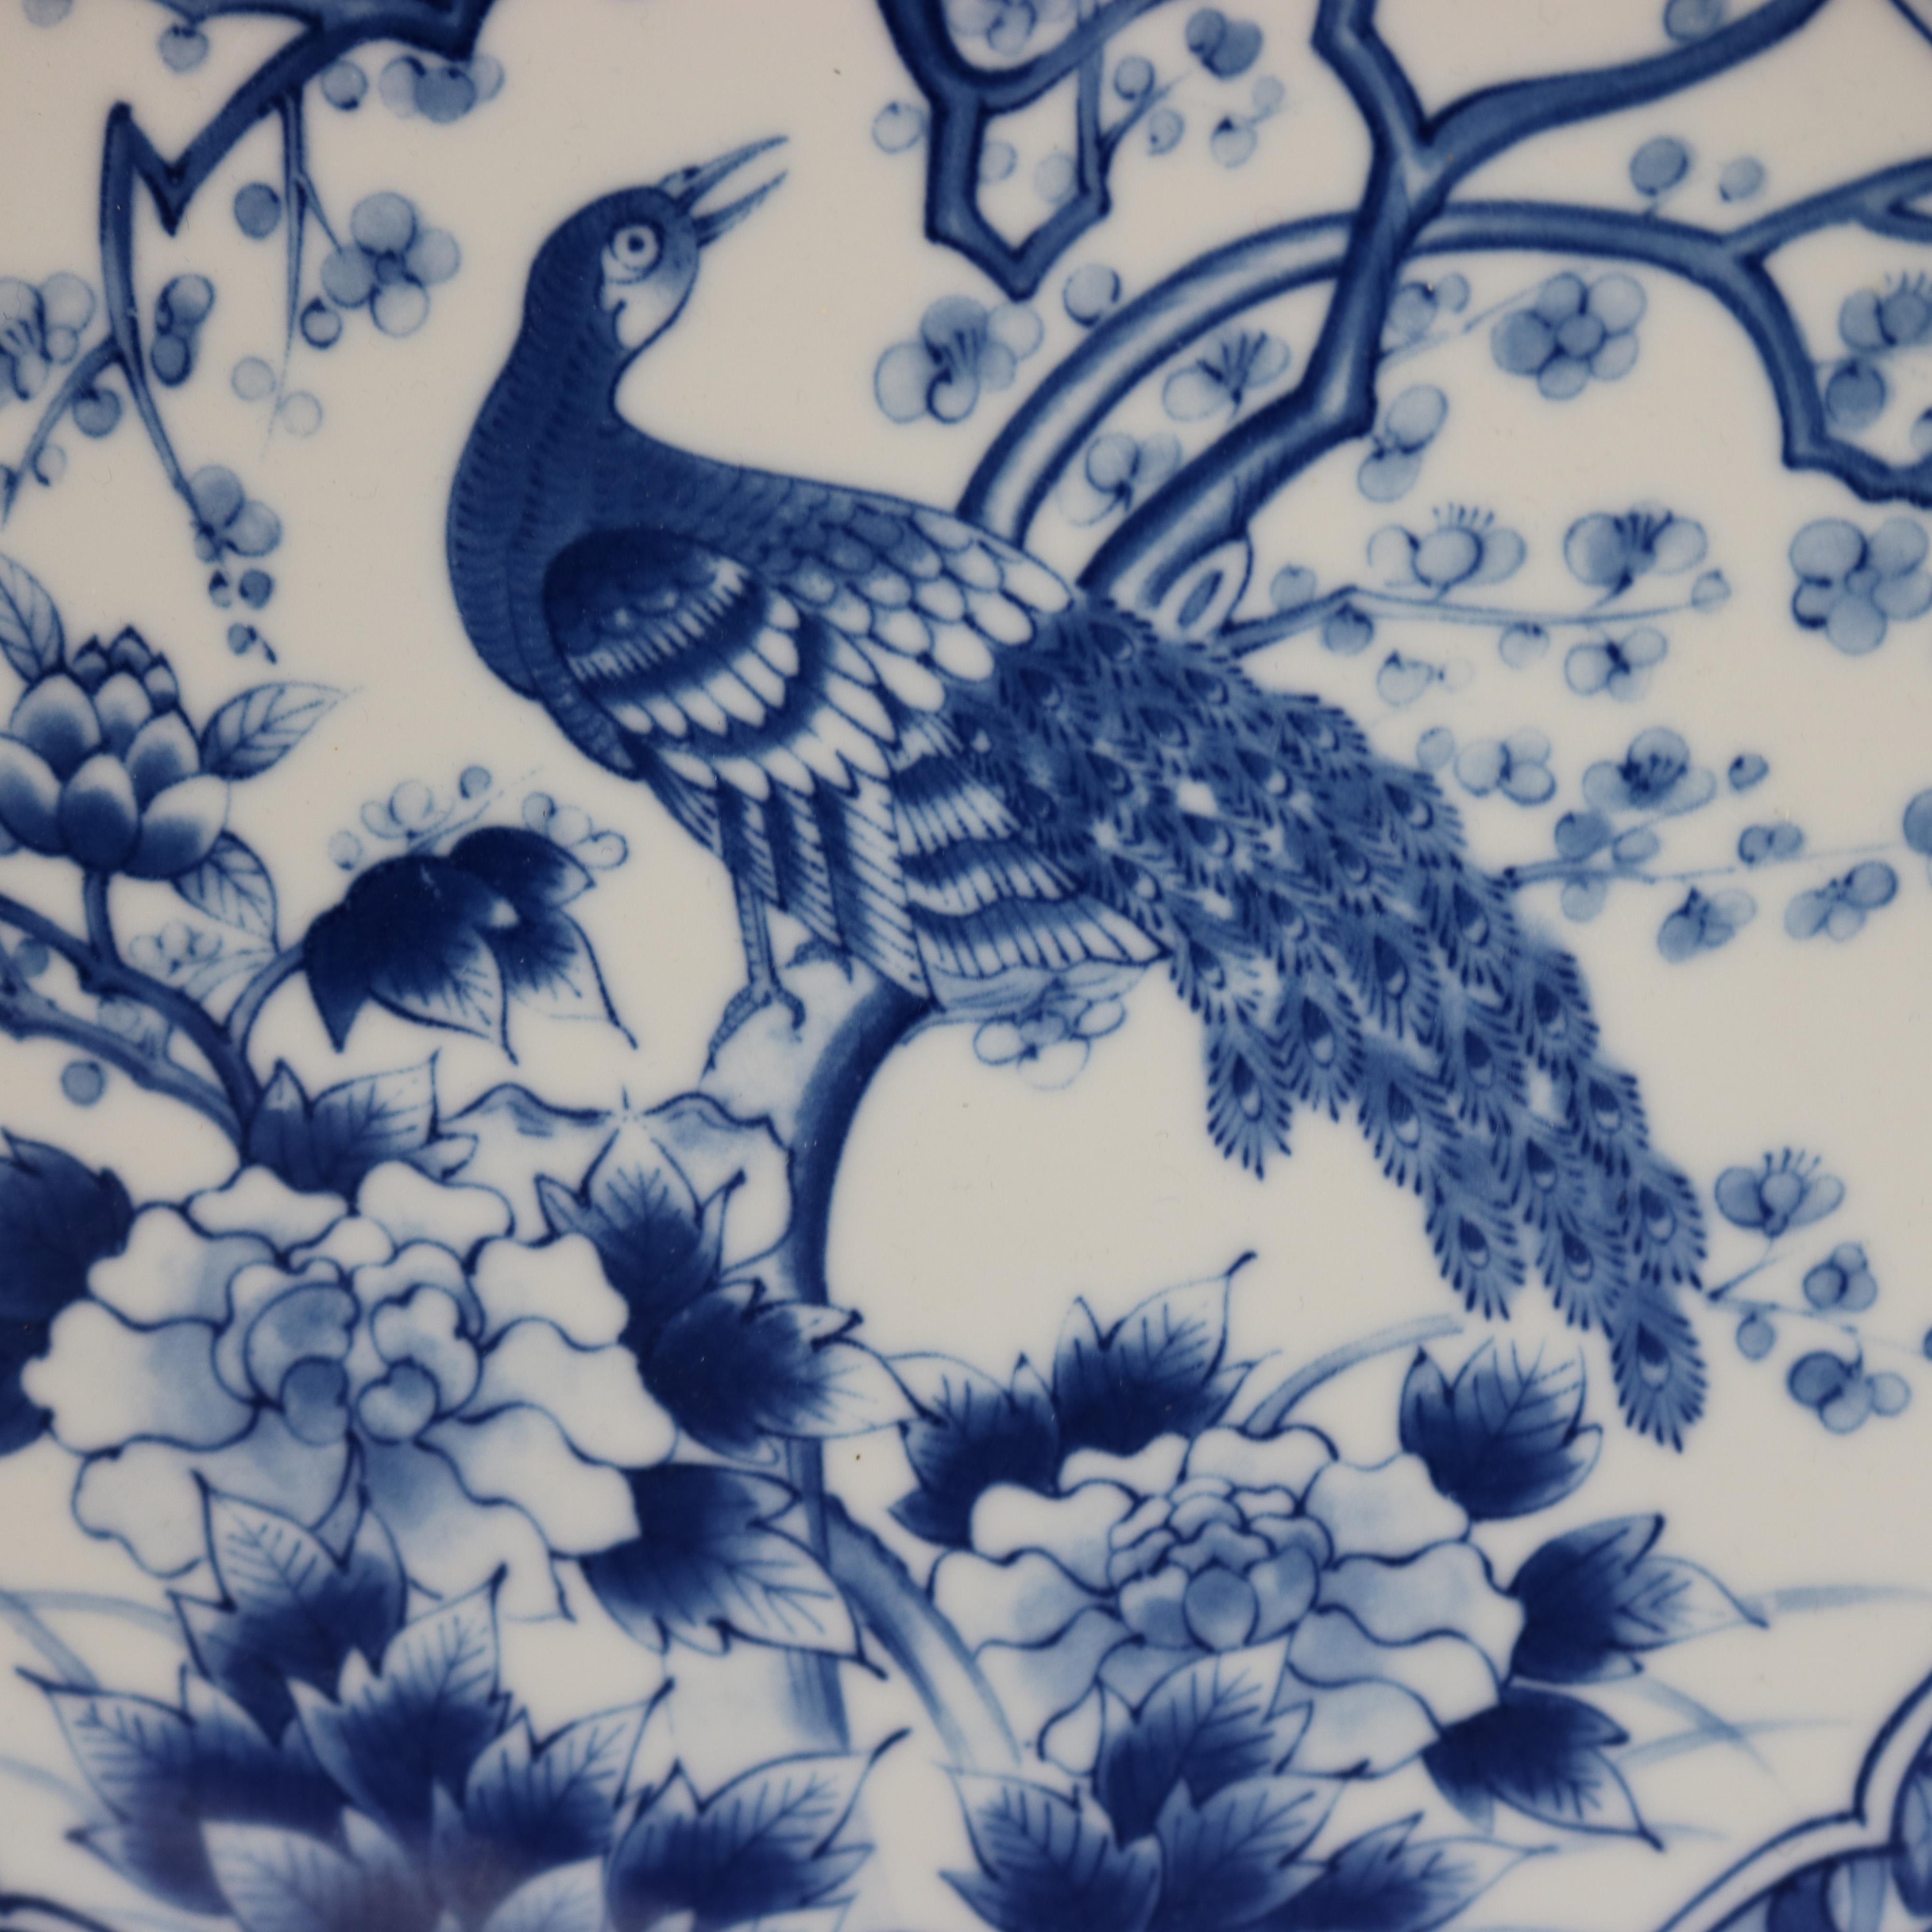 antique japanese blue and white porcelain